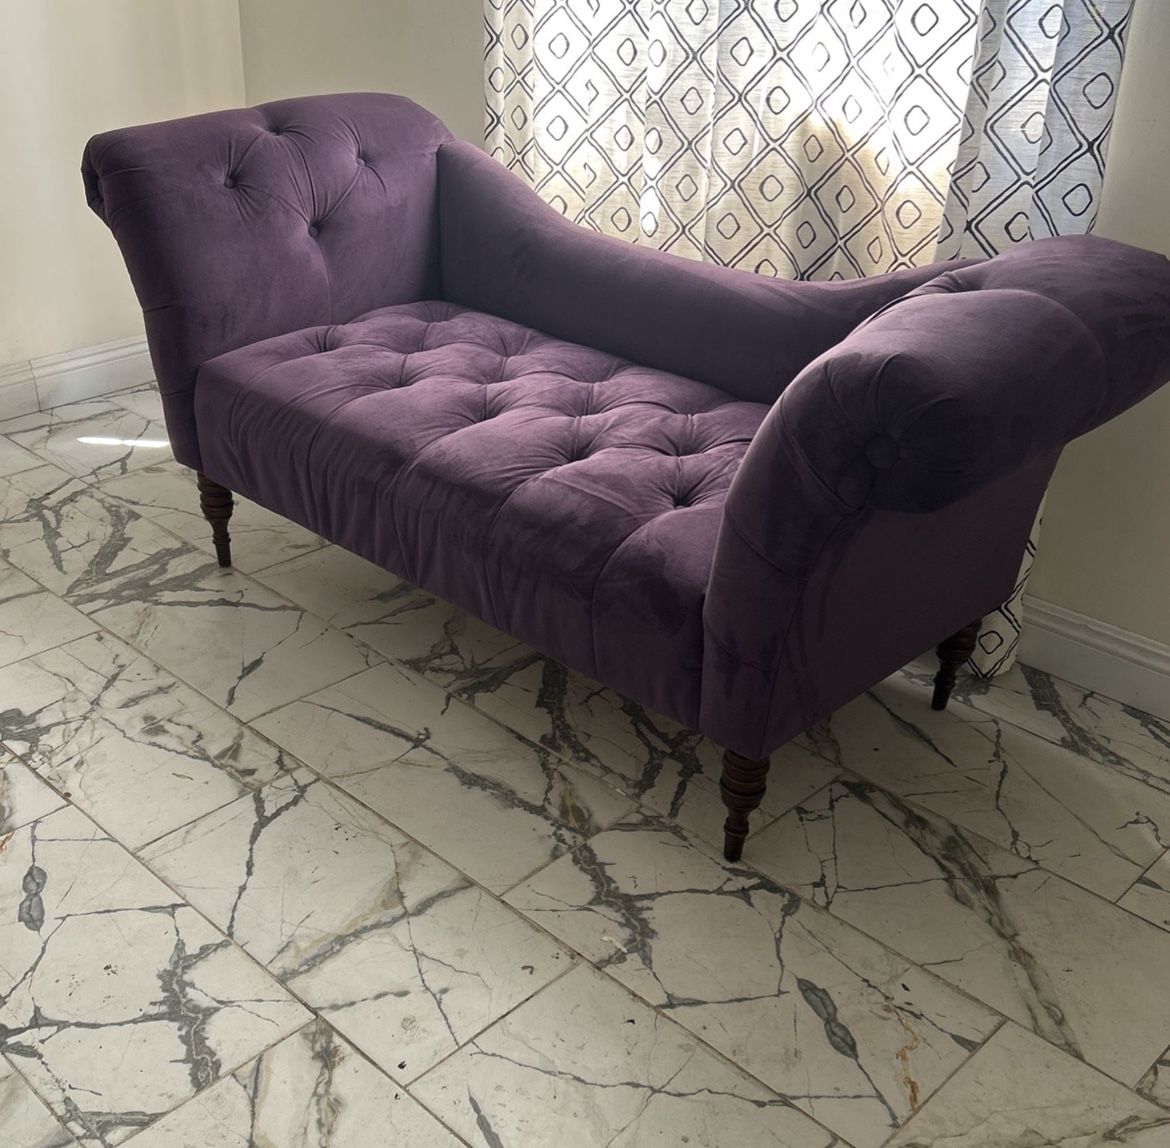 Chaise Lounge Sofa Couch FREE DELIVER 